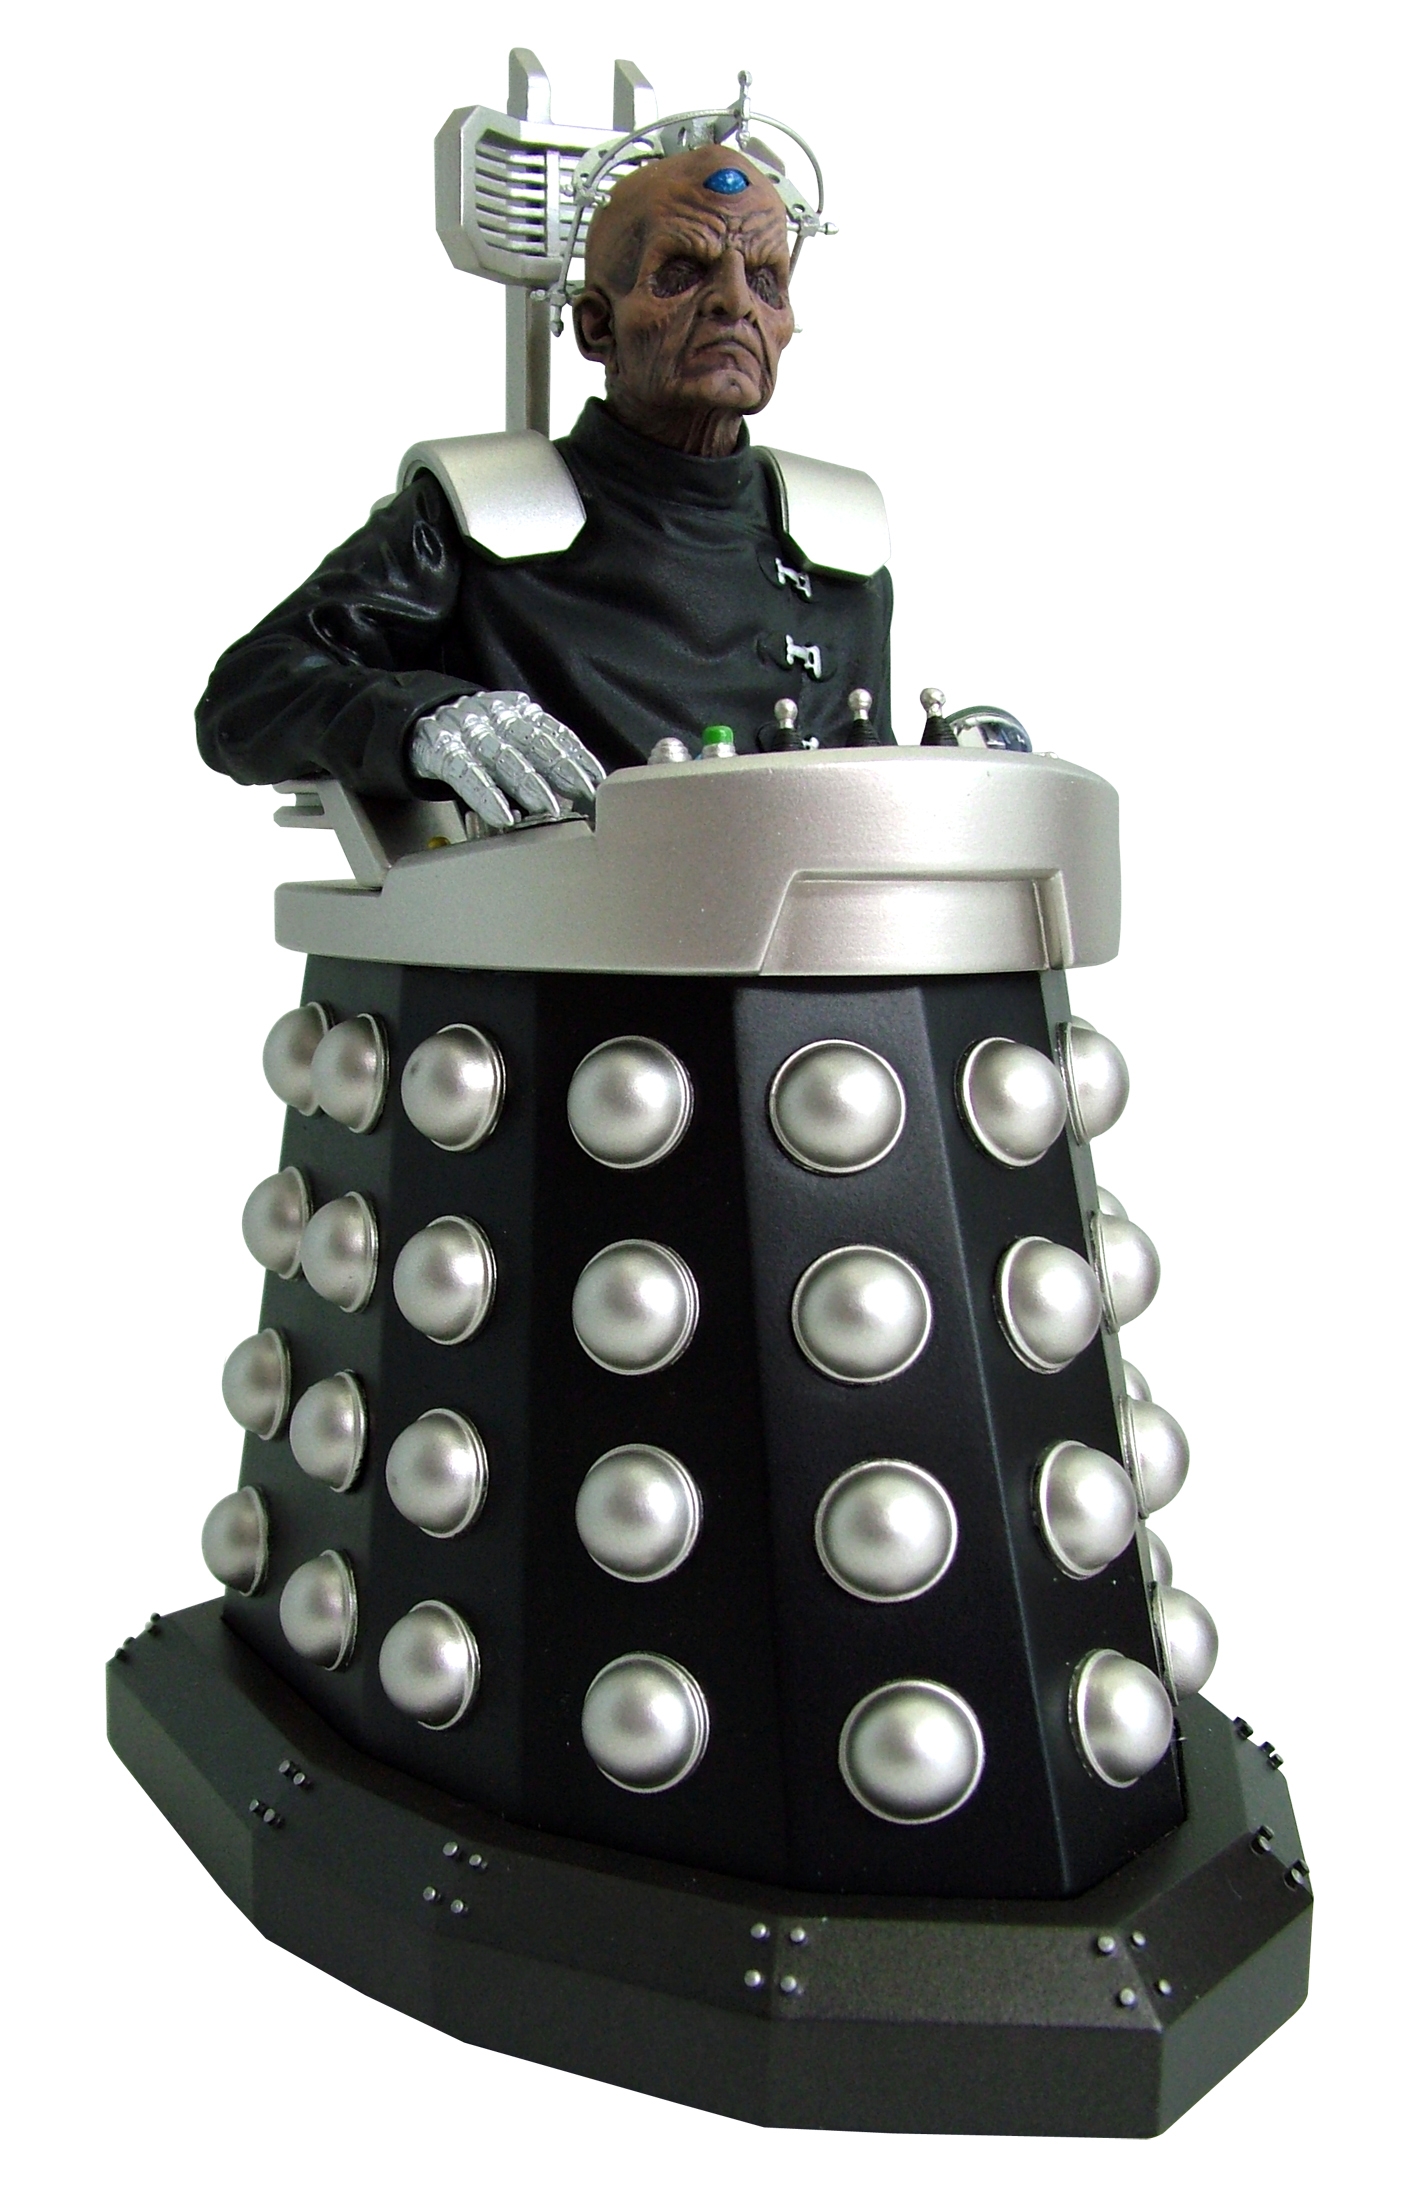 Dr Who Action Figures Series 4 - 5 Davros